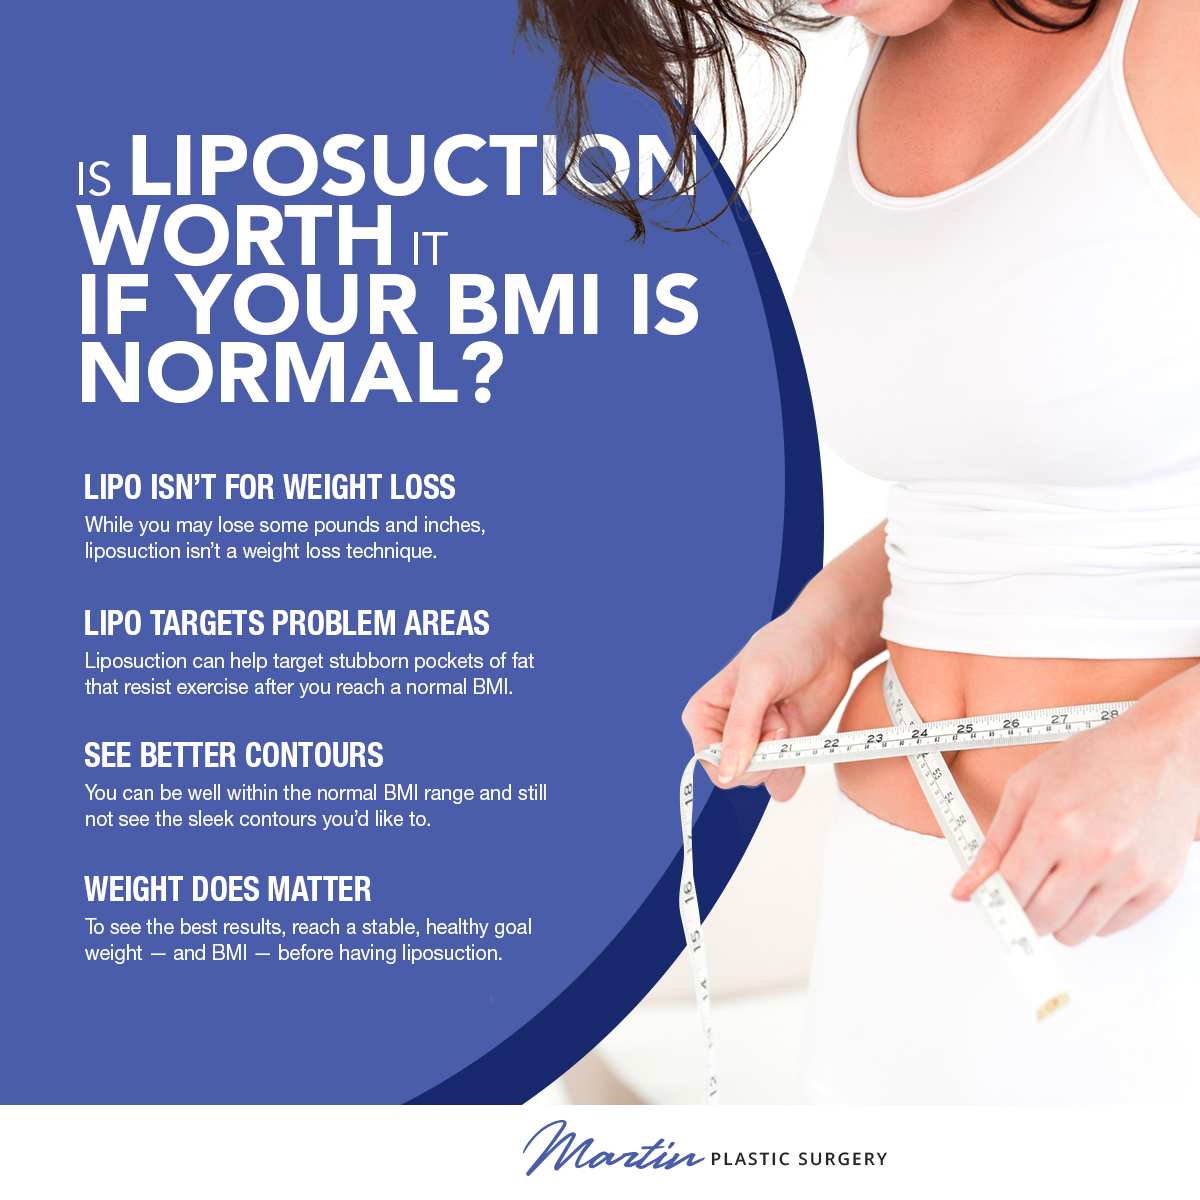 Is Liposuction Worth It If Your BMI is Normal? [Infographic] img 1